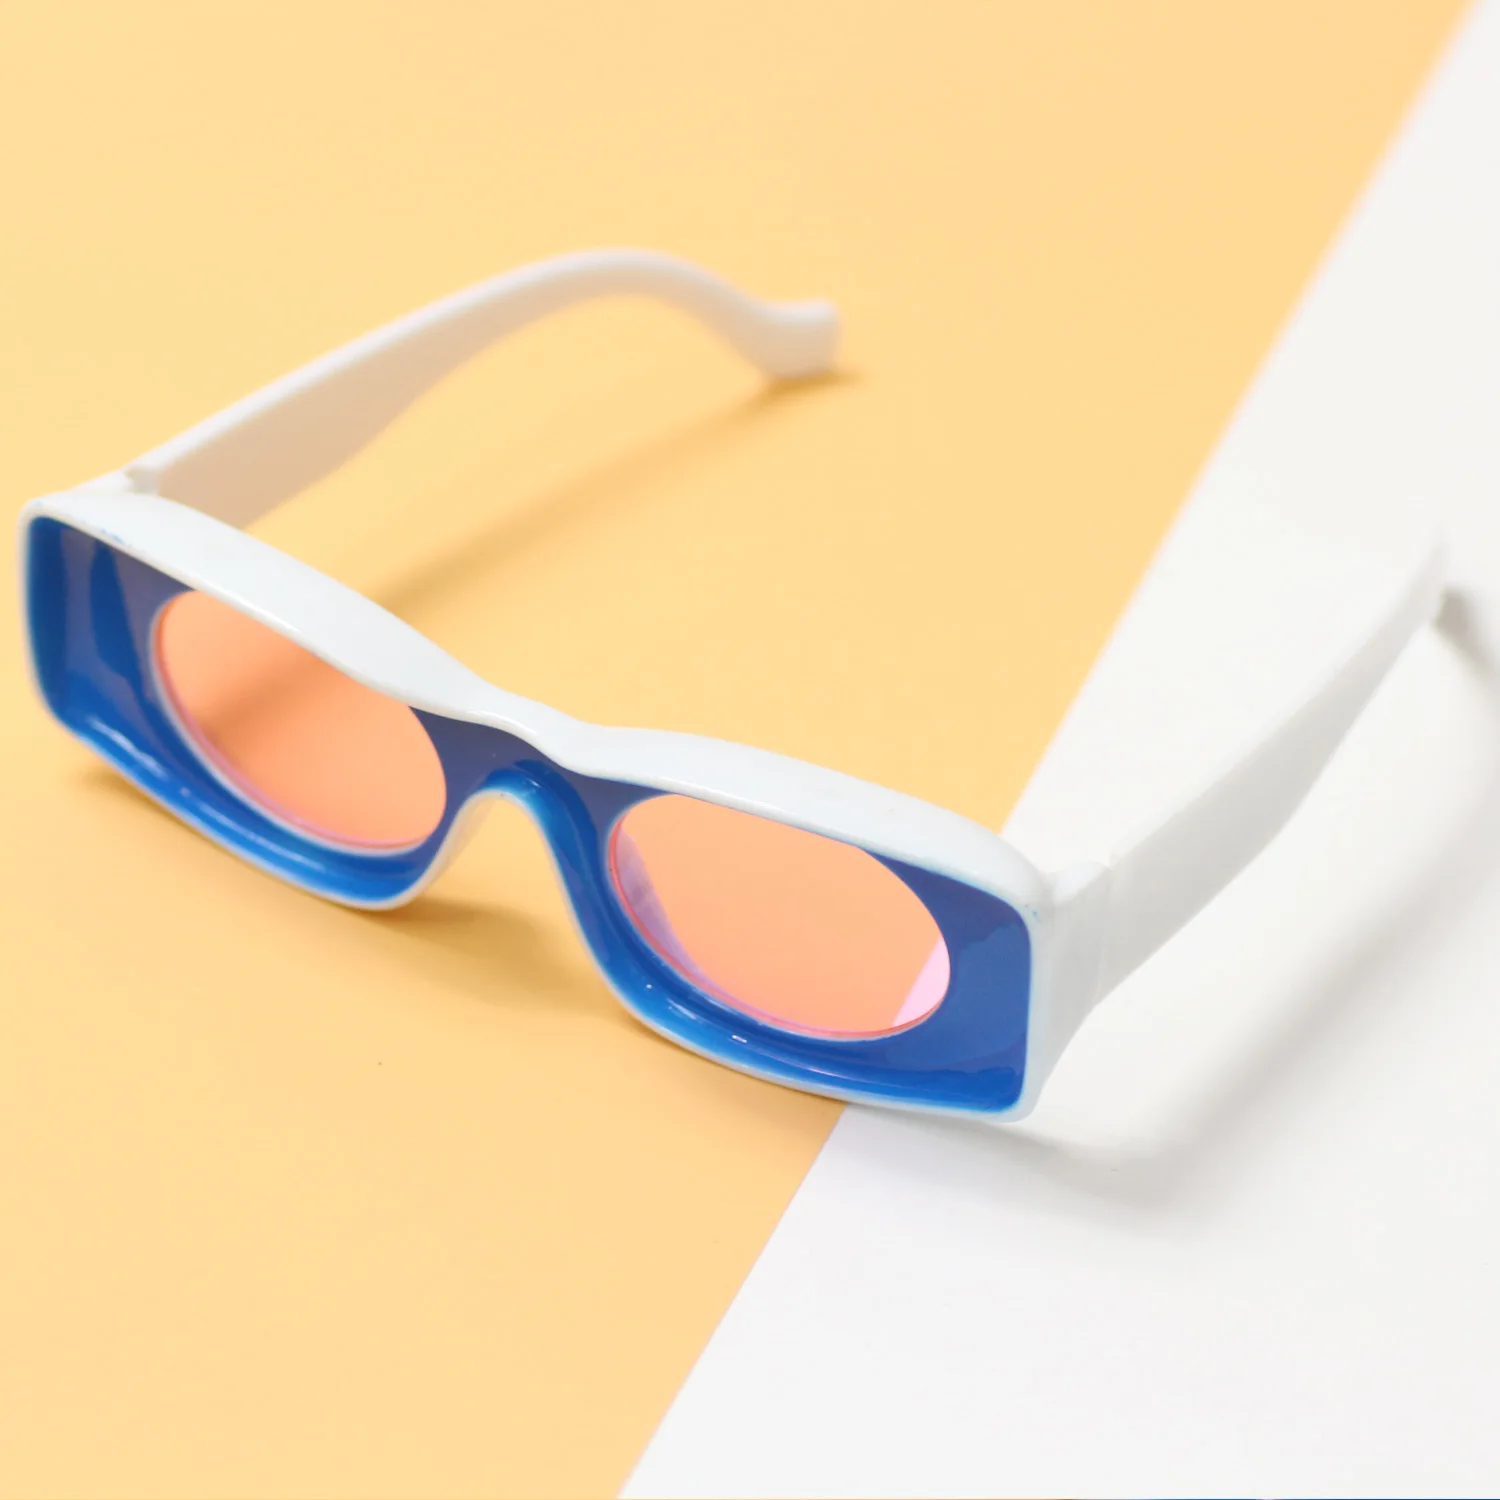 

Personalized Concave Frame Sunglasses Colorful AC+PC Frame Sunglasses Eyewear Small Square Shades Glasses, Multi colors